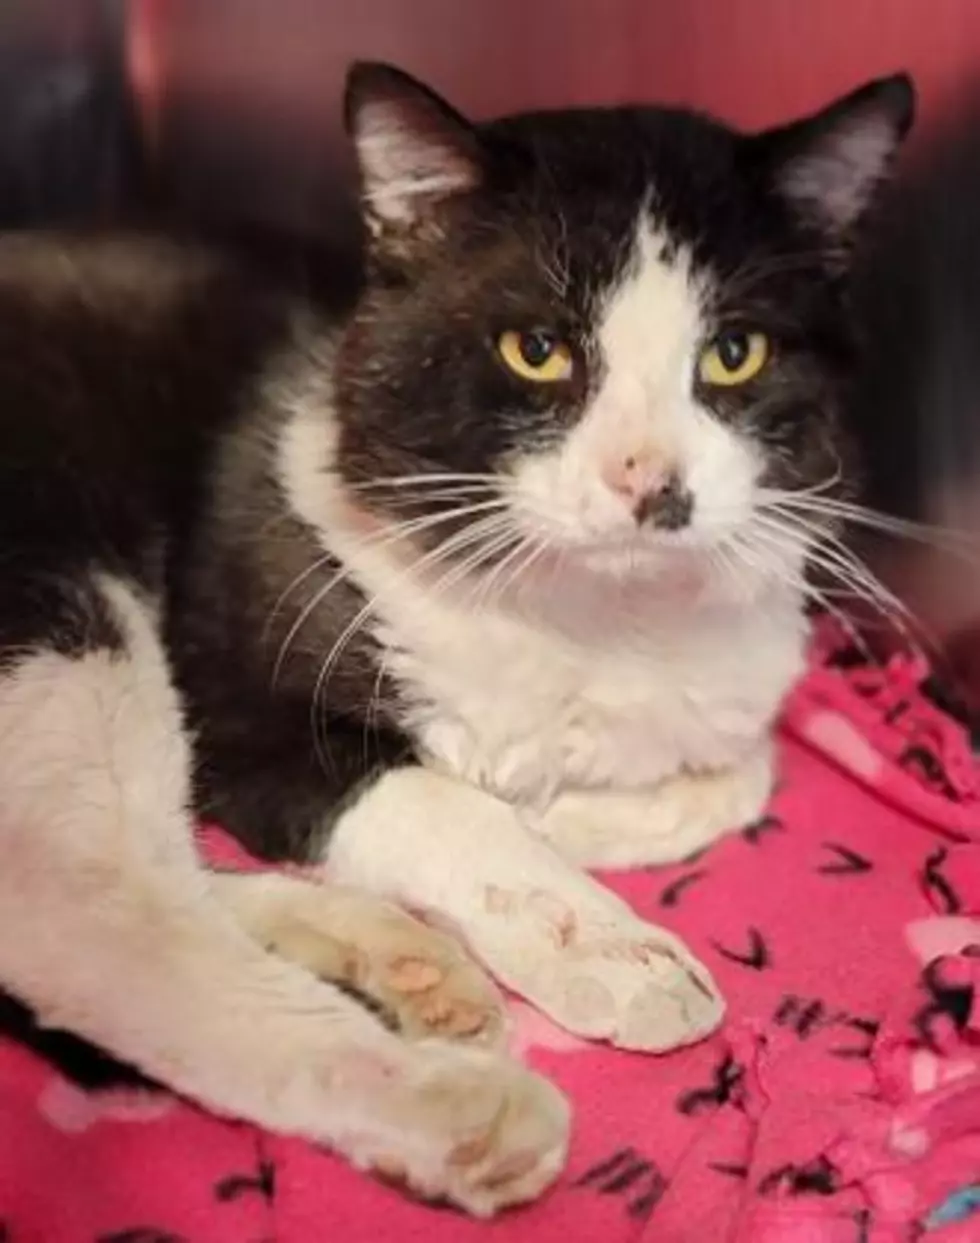 This Tough, But Sweet Cat Needs New Home to Cuddle Up In